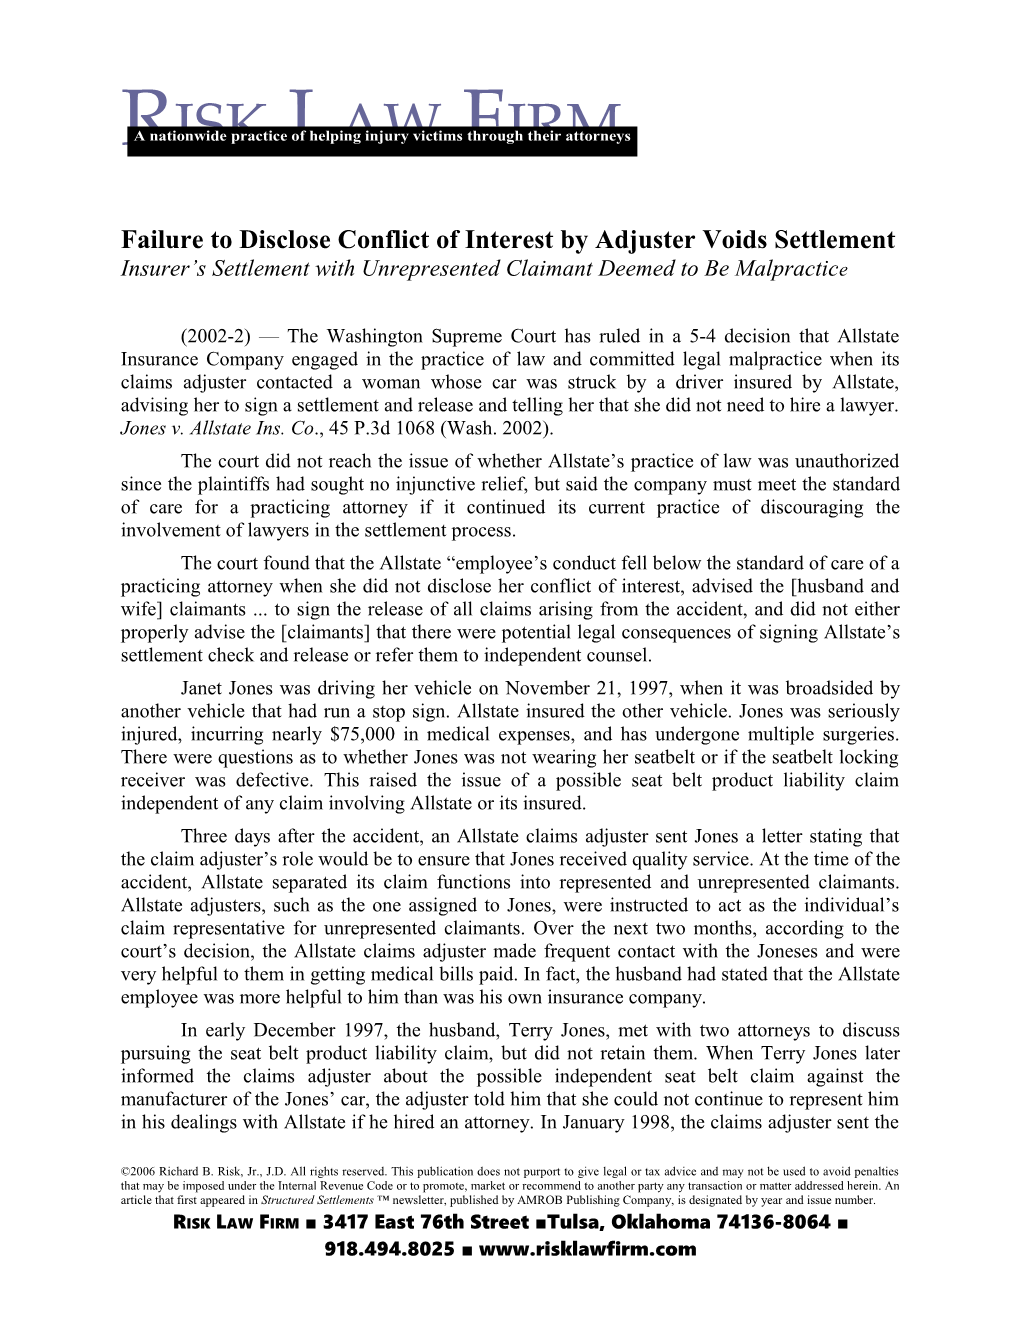 Failure to Disclose Conflict of Interest by Adjuster Voids Settlement